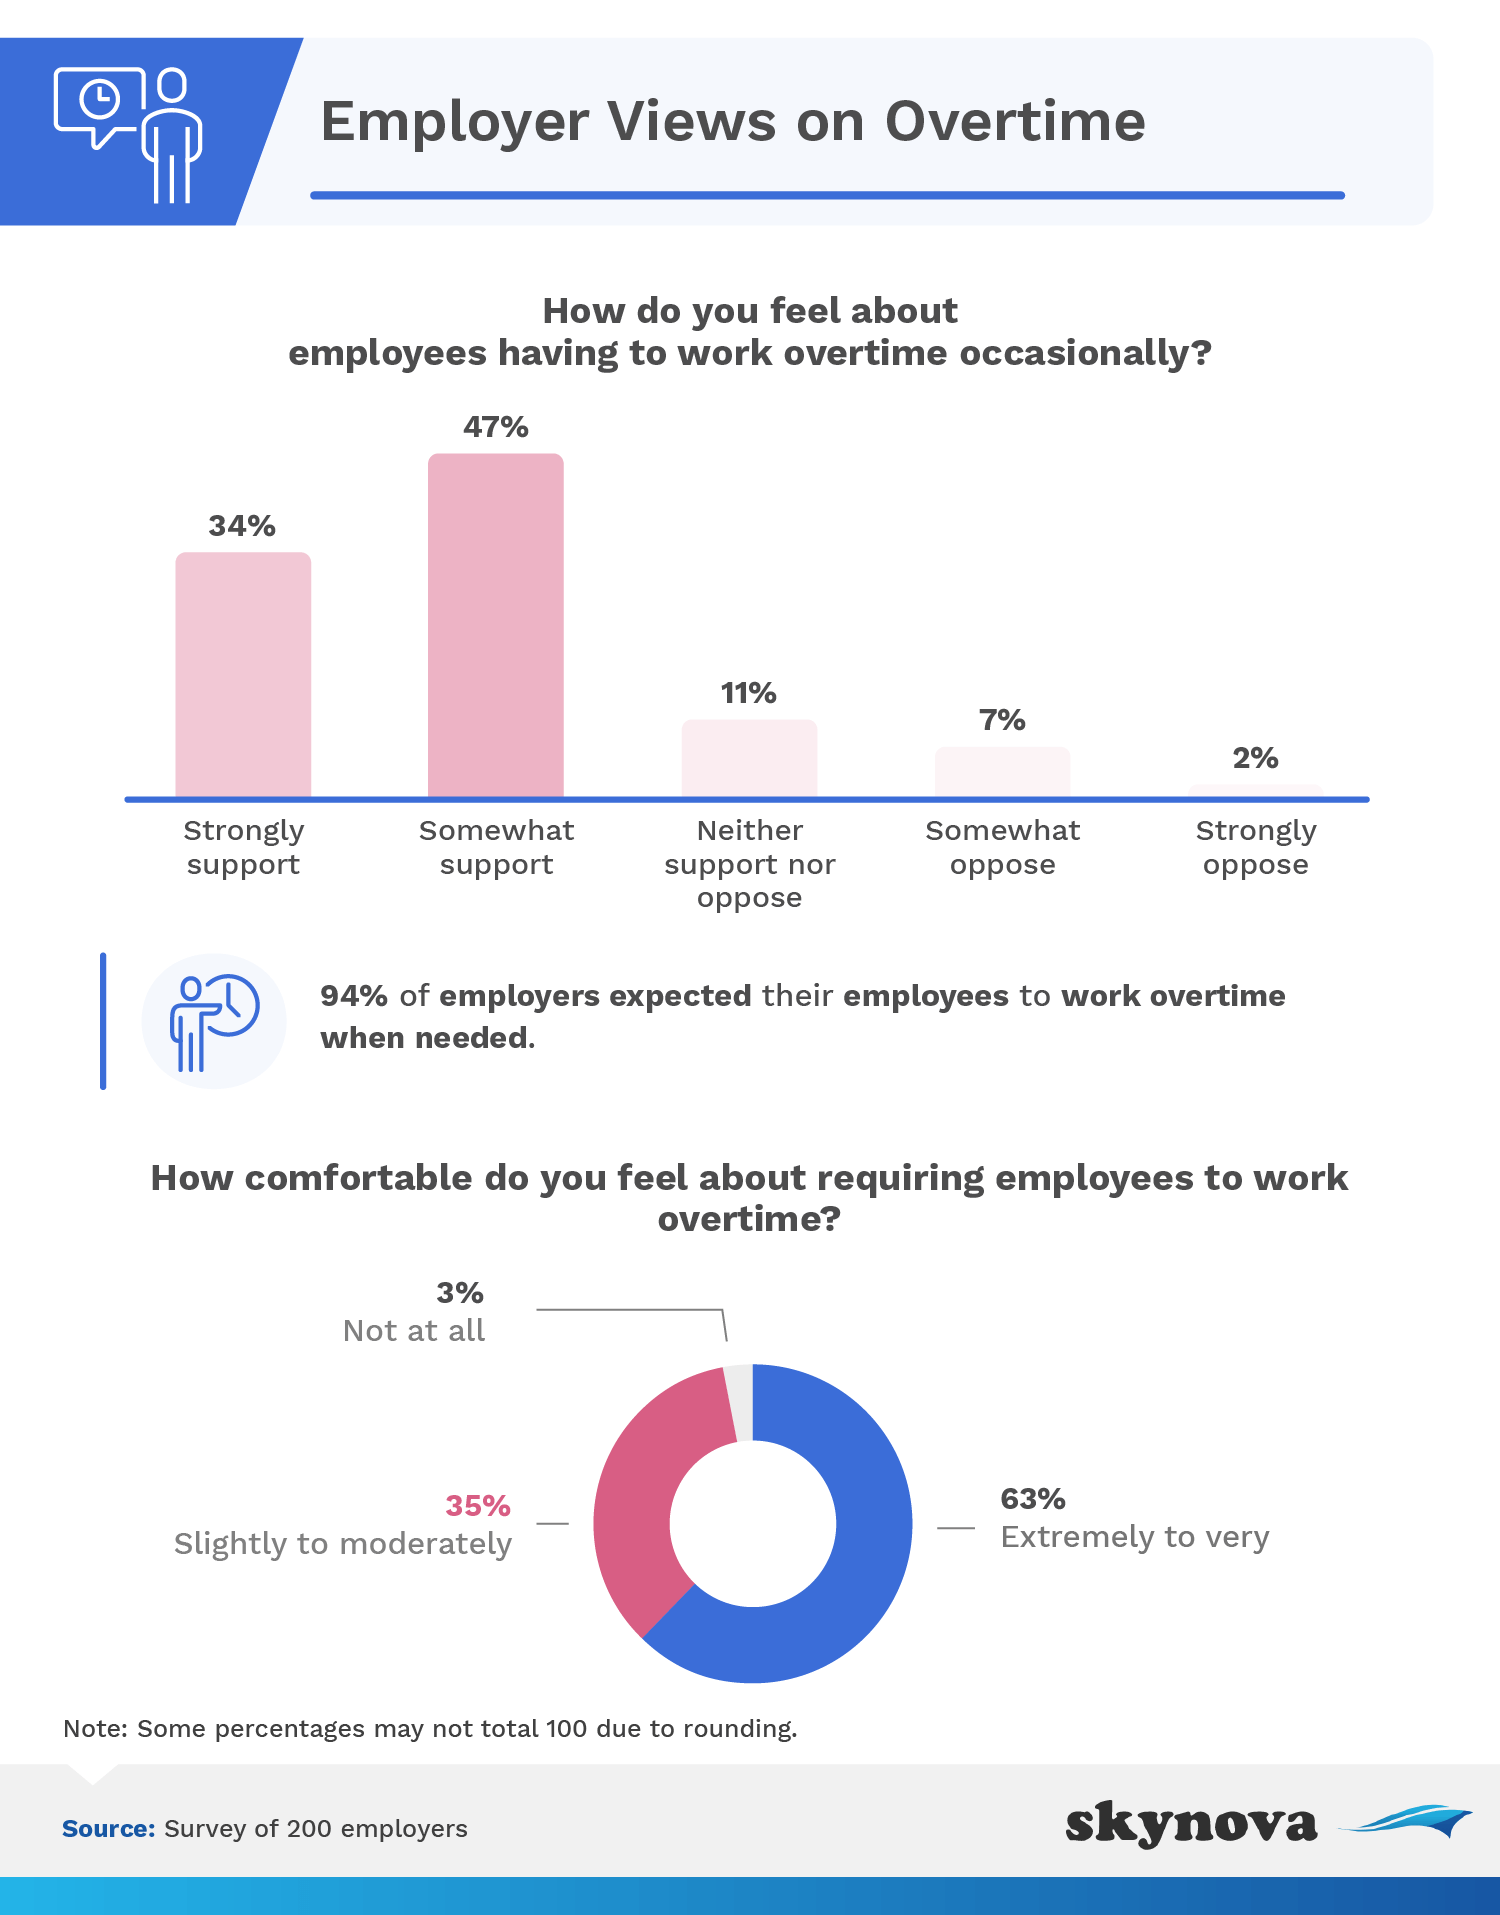 Employers' views on overtime